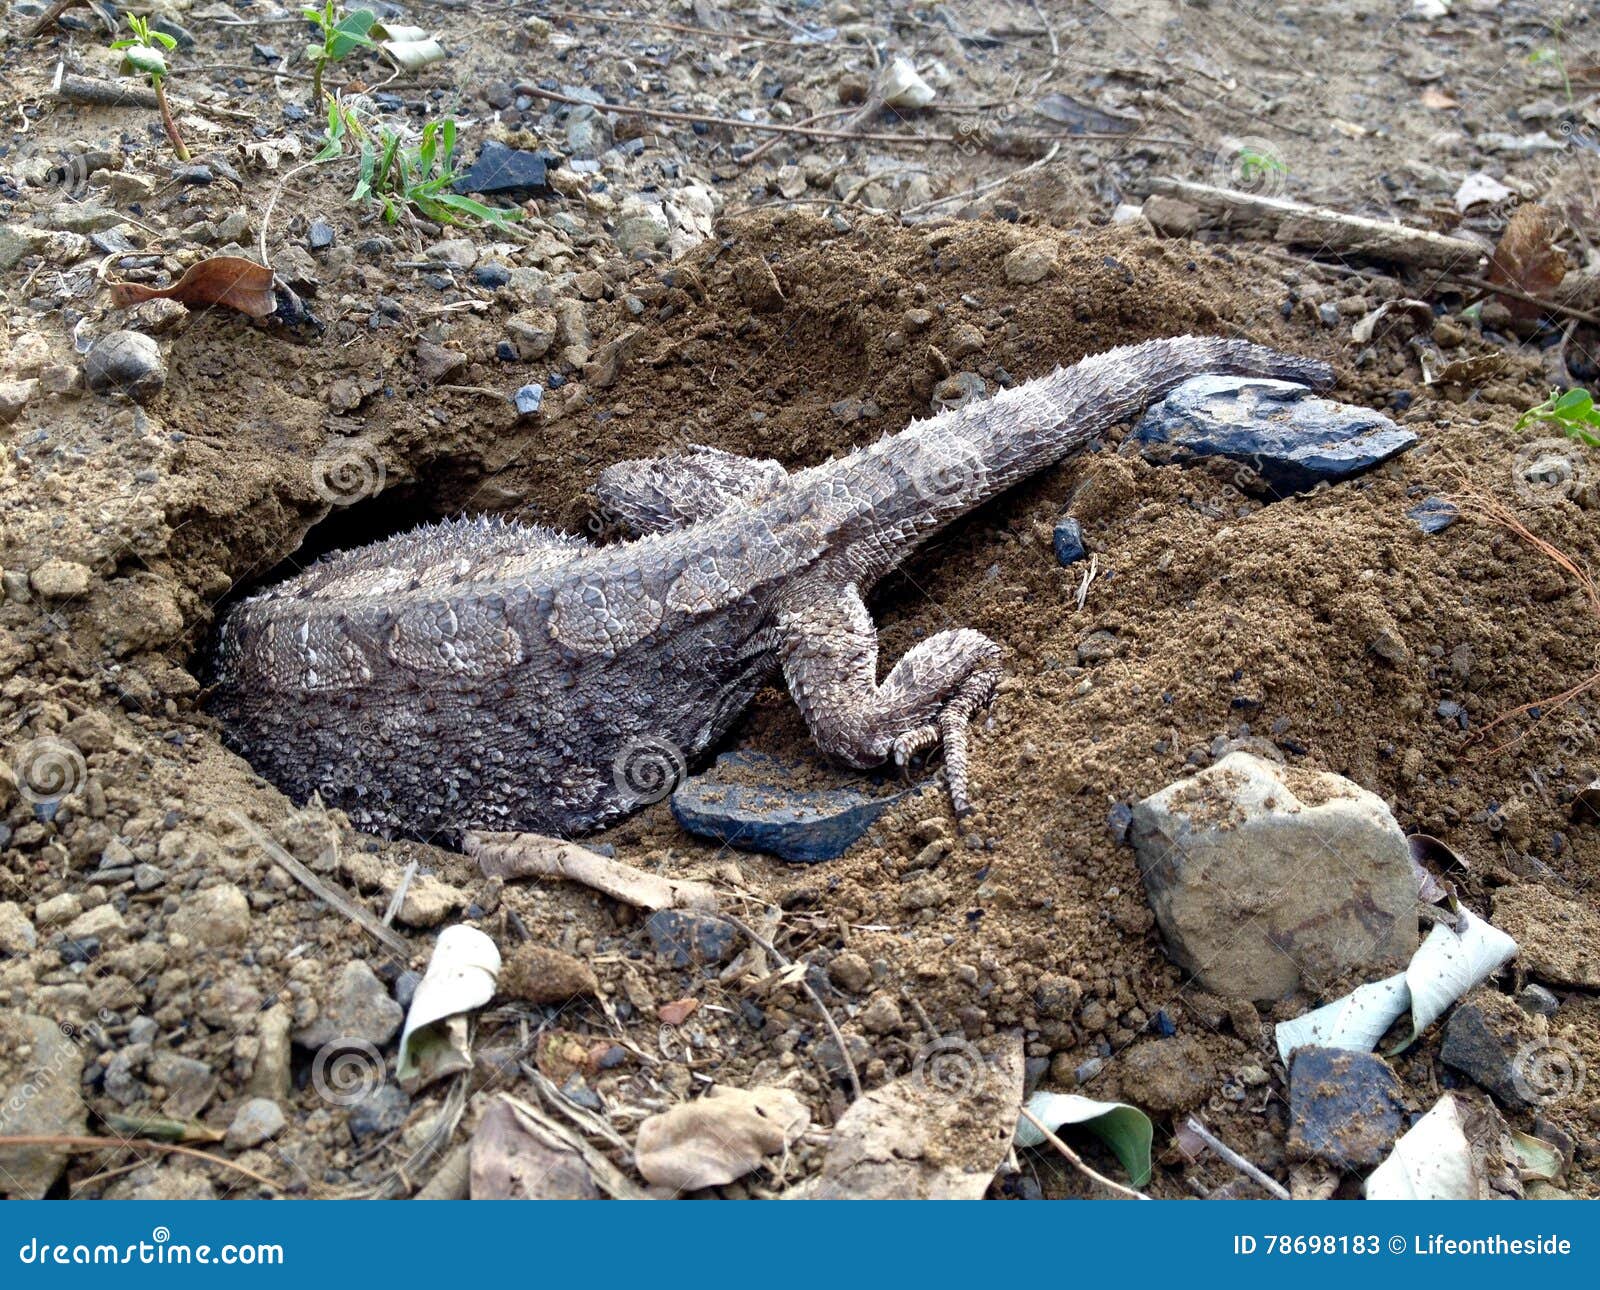 rare capture eastern water dragon lizard digging hole to lay eggs